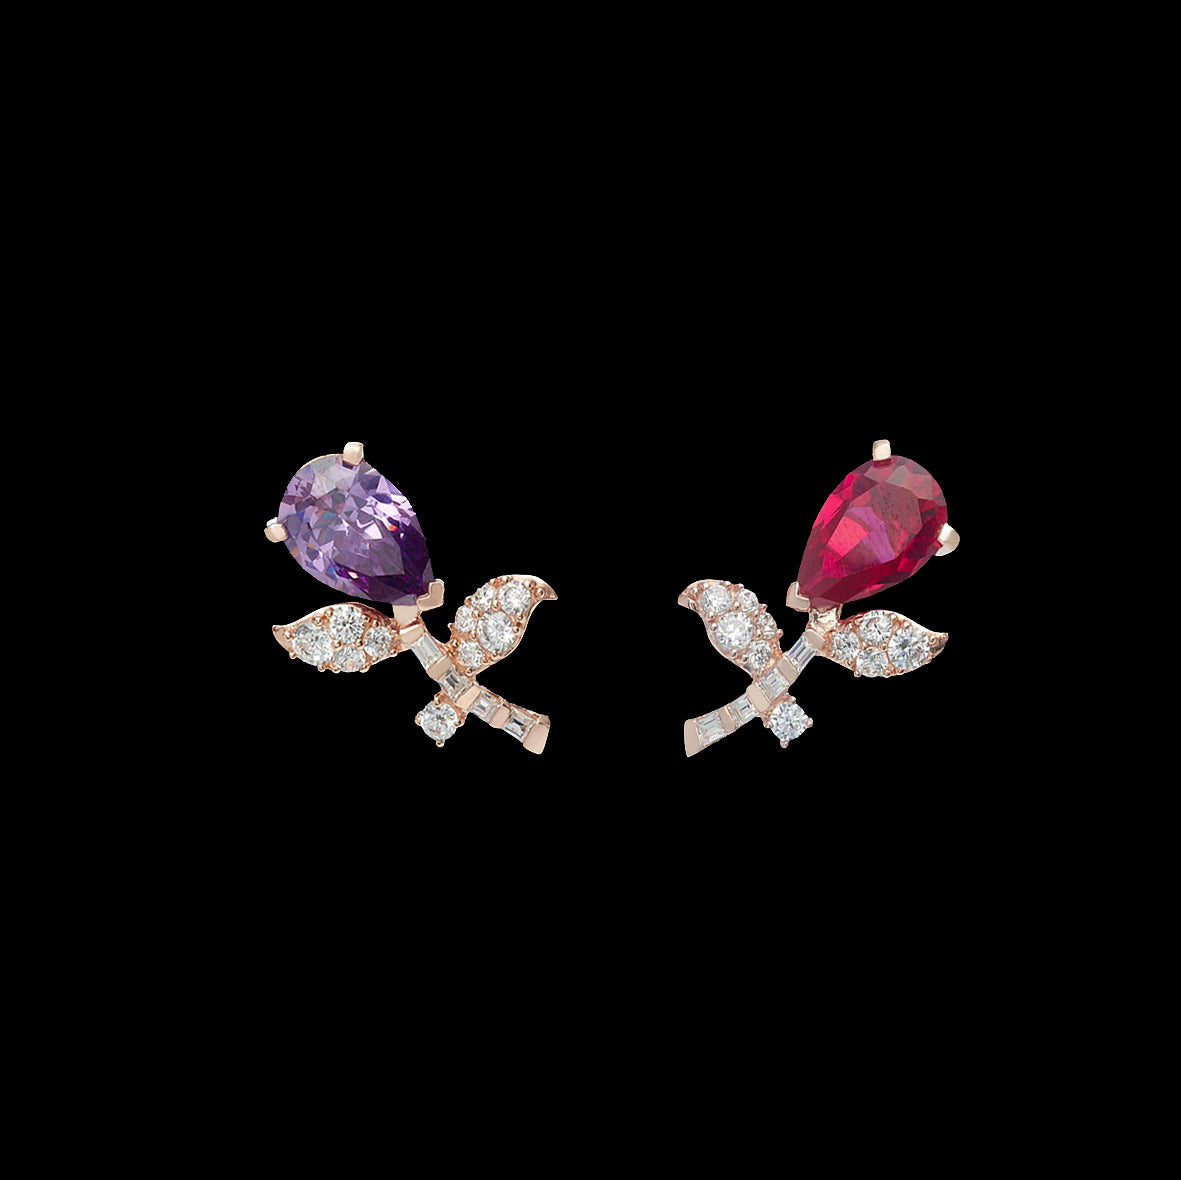 Ruby Amethyst Tulip Earrings, Earring, Anabela Chan Joaillerie - Fine jewelry with laboratory grown and created gemstones hand-crafted in the United Kingdom. Anabela Chan Joaillerie is the first fine jewellery brand in the world to champion laboratory-grown and created gemstones with high jewellery design, artisanal craftsmanship and a focus on ethical and sustainable innovations.